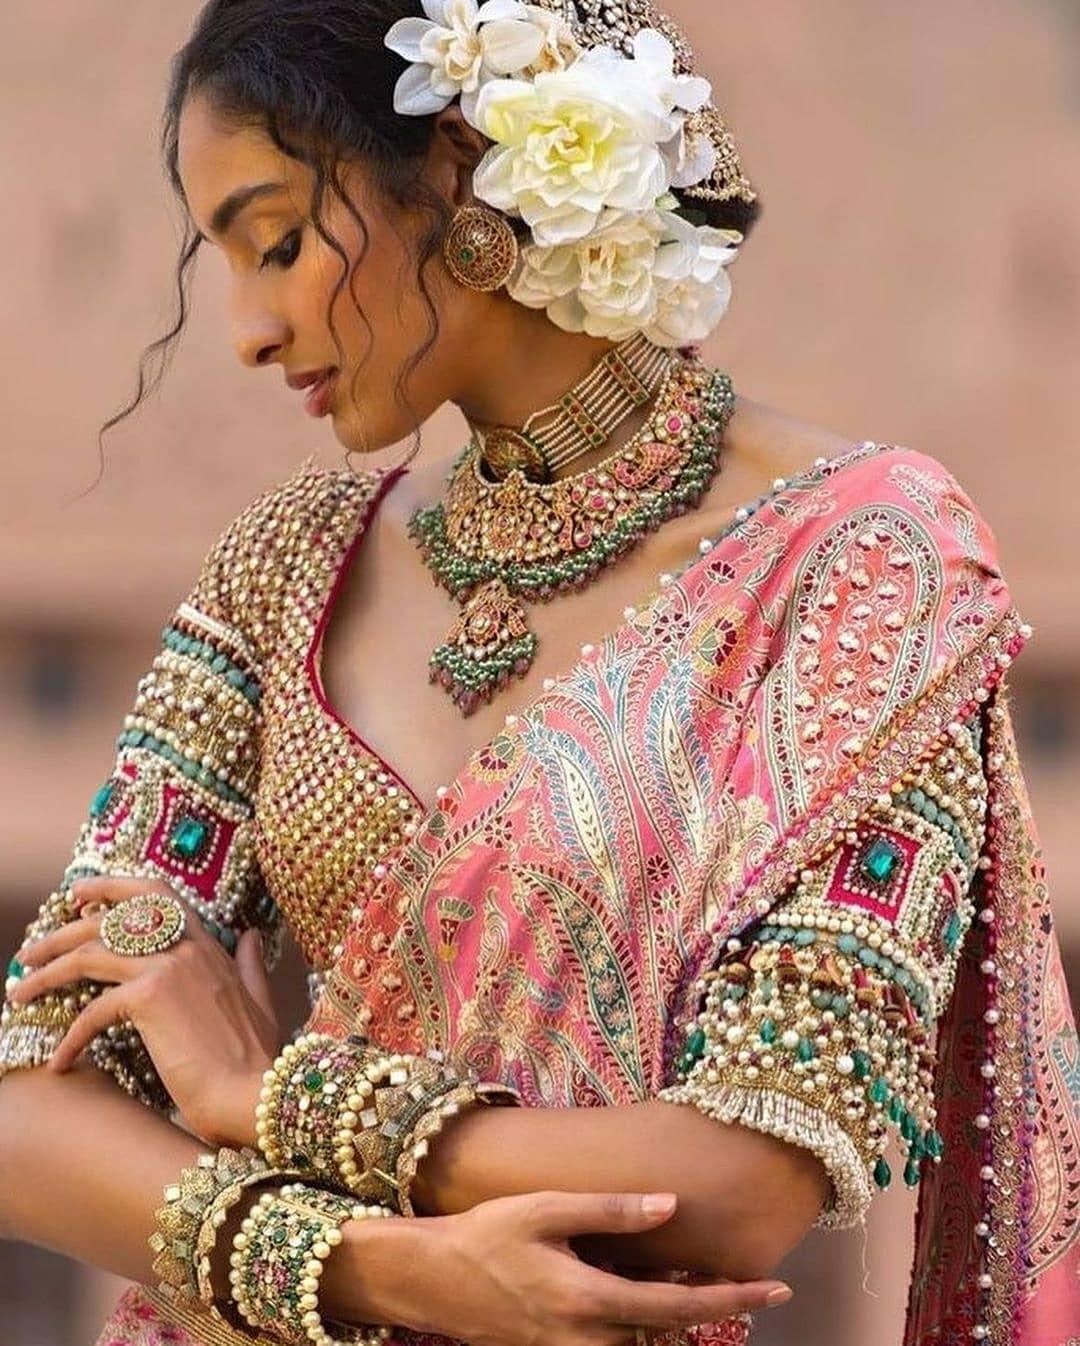 150+ Wedding Blouse Designs - Latest and Trending Wedding Blouse ...